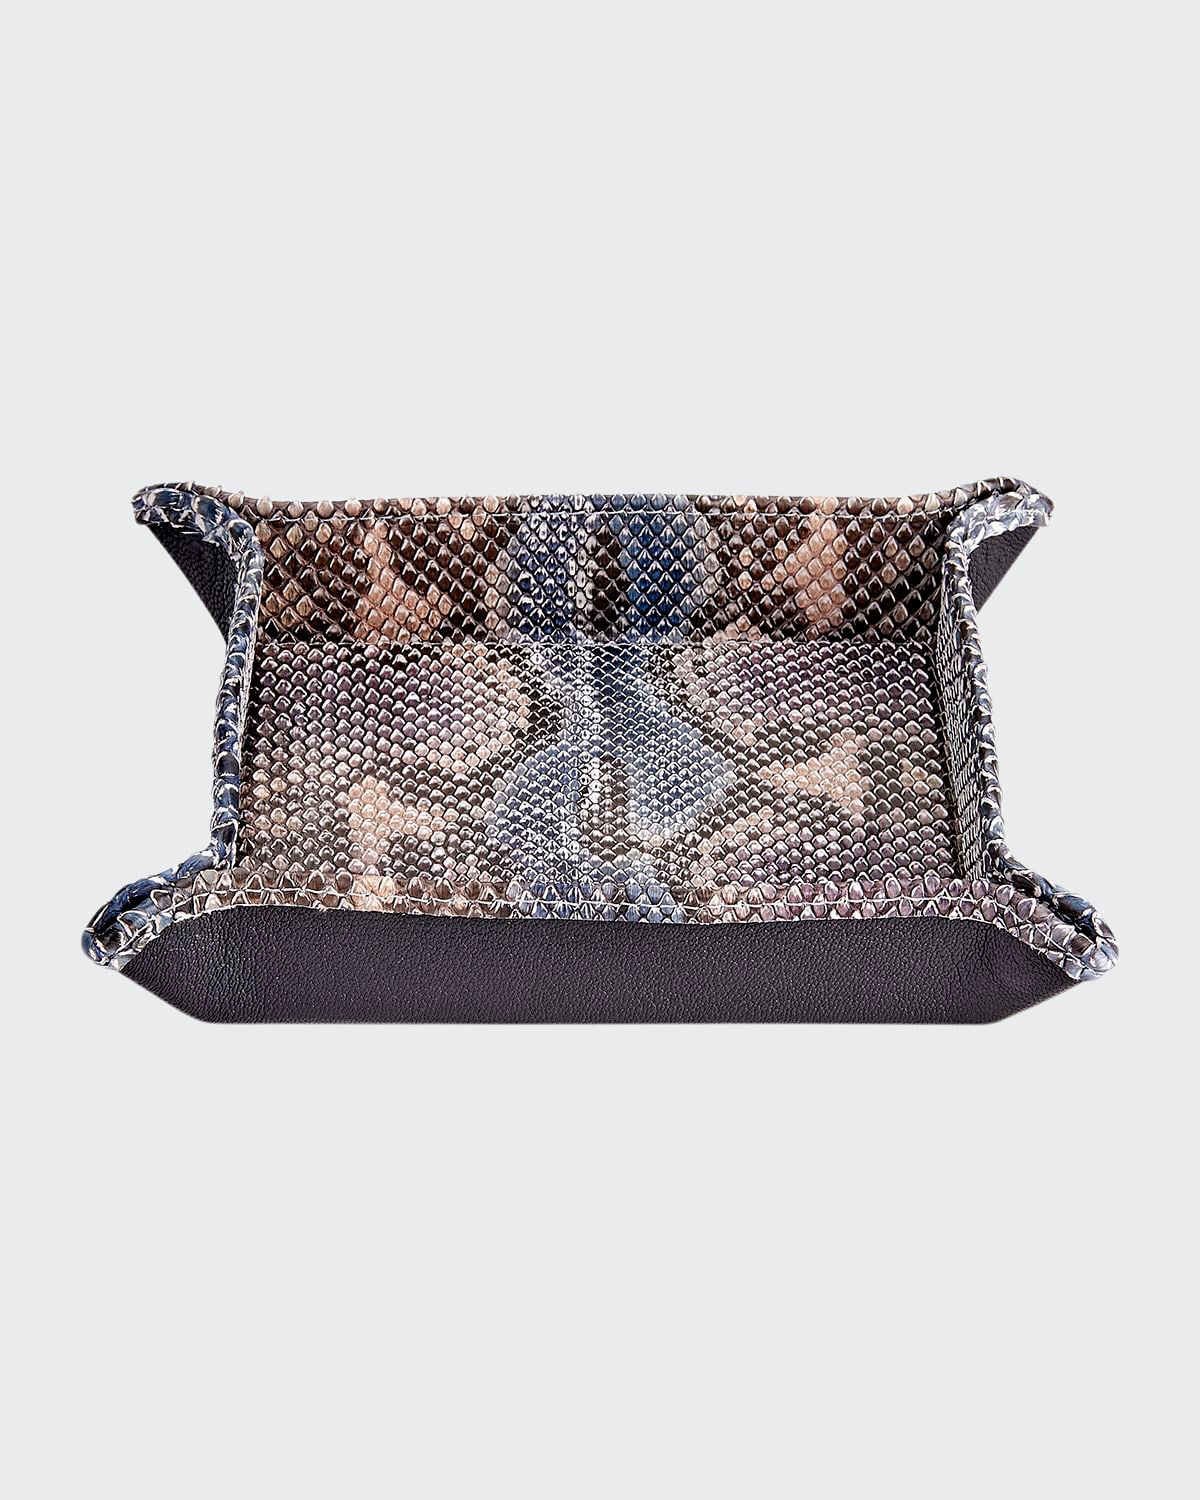 Graphic Image Large Python Valet Tray In Multi